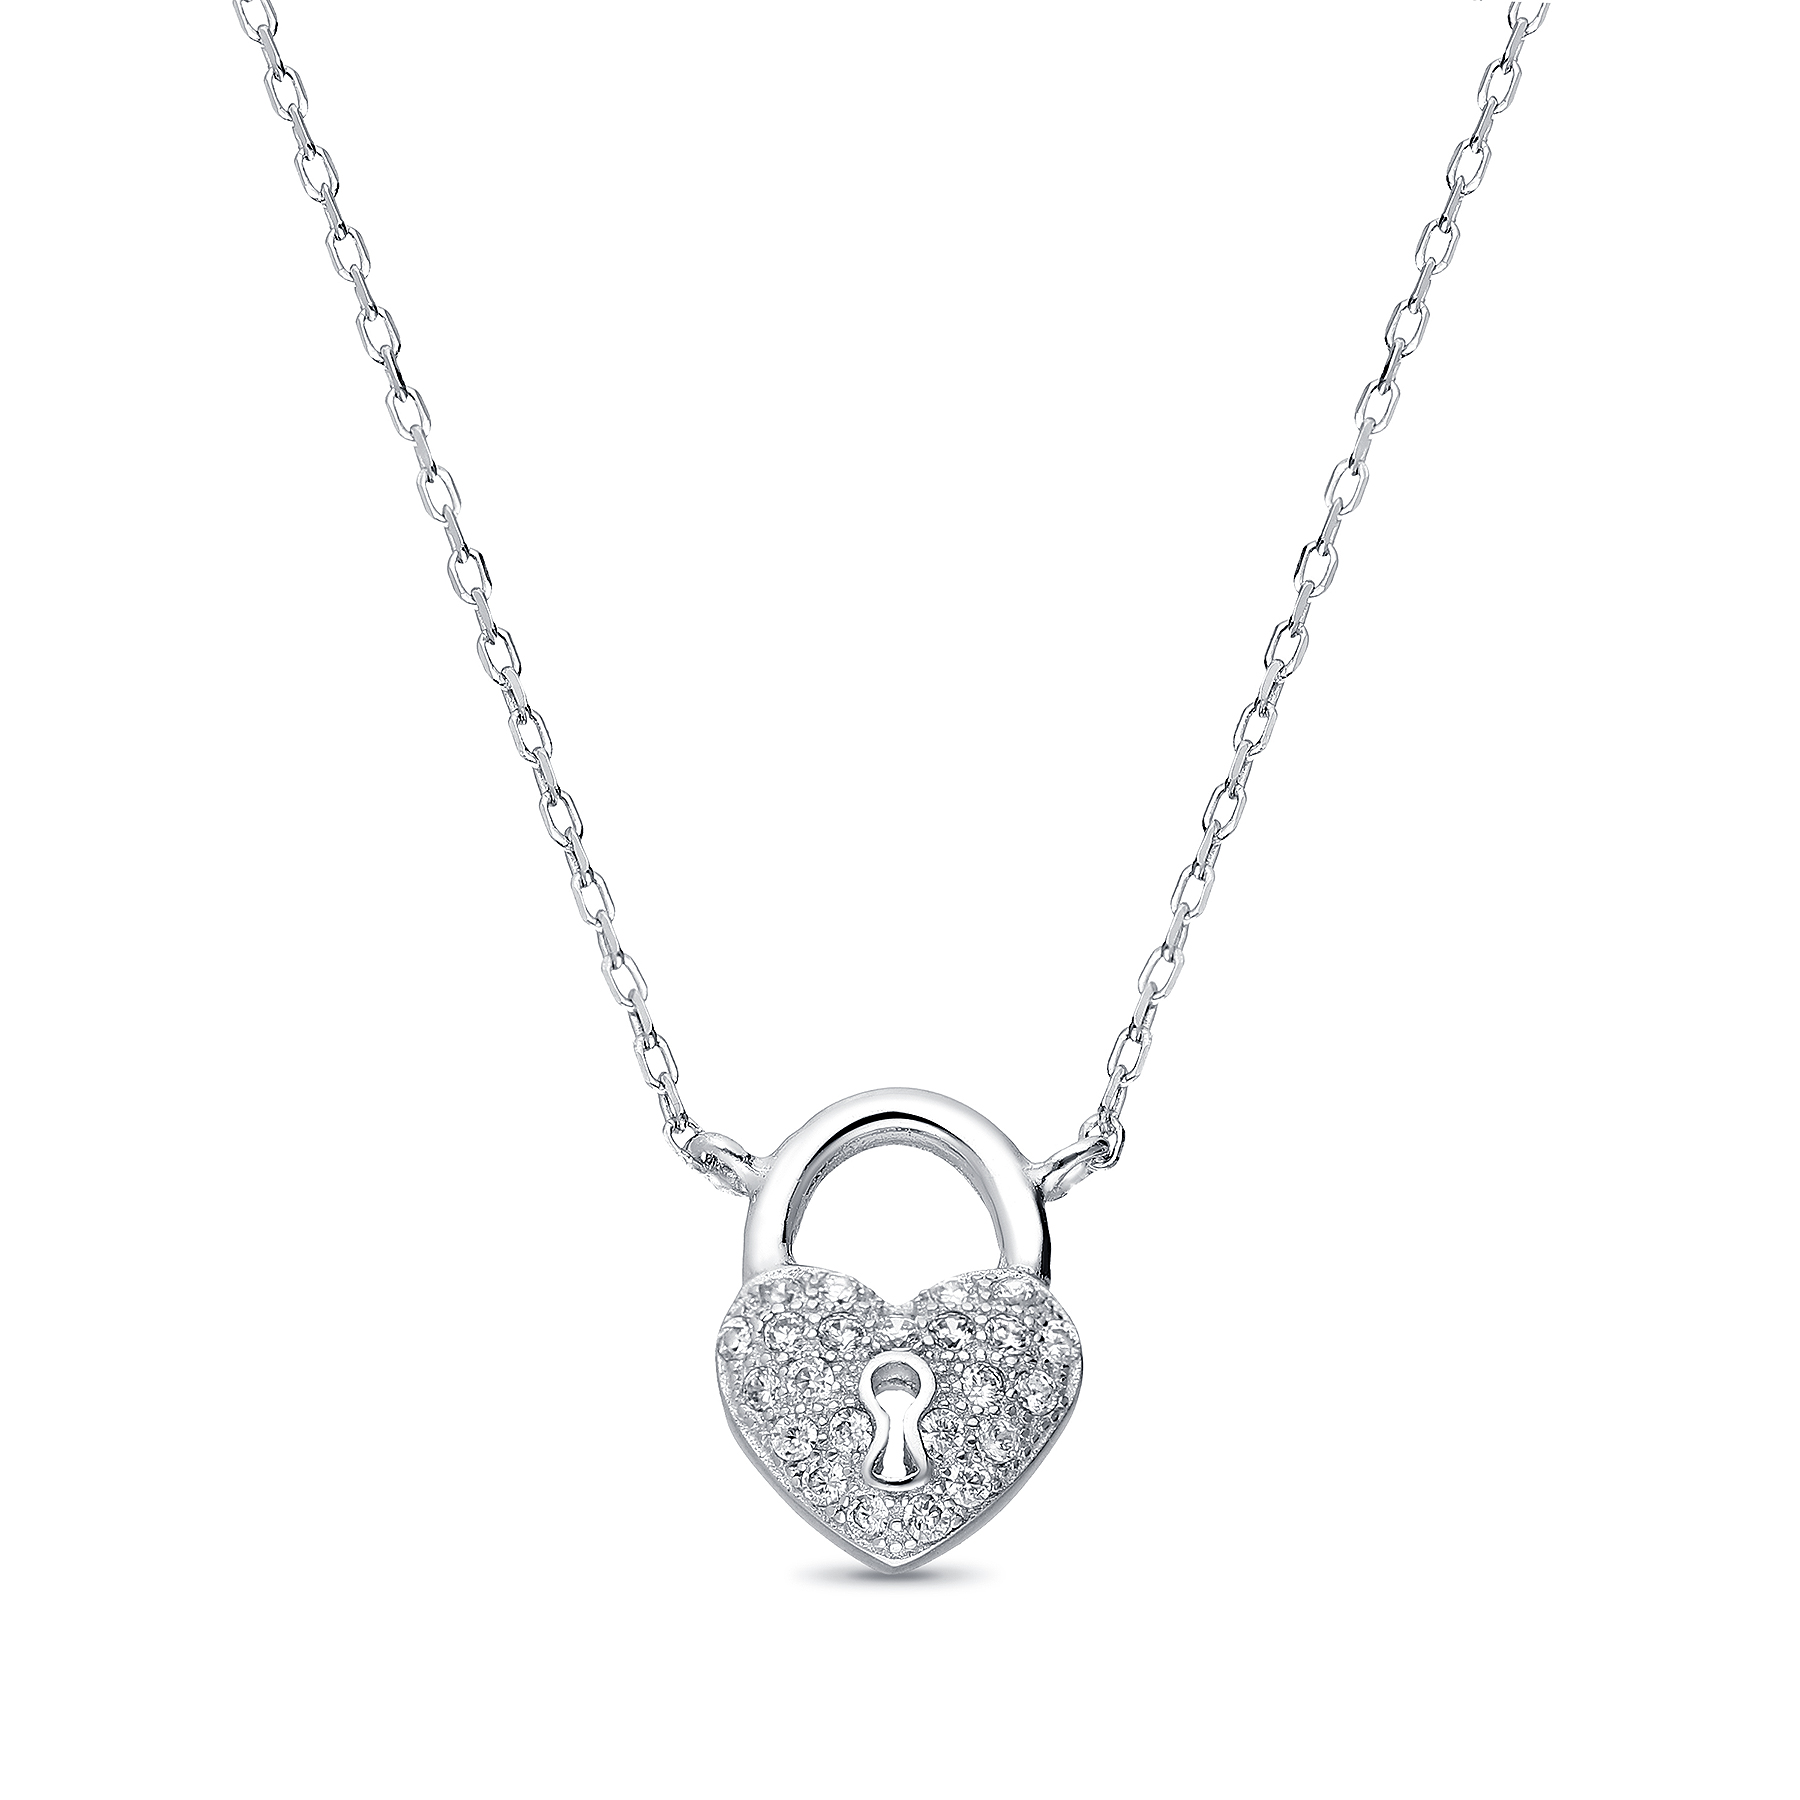 701-12188K - Wholesale 925 Sterling Silver Lock Necklace Decorated With CZ And Plated With Rhodium